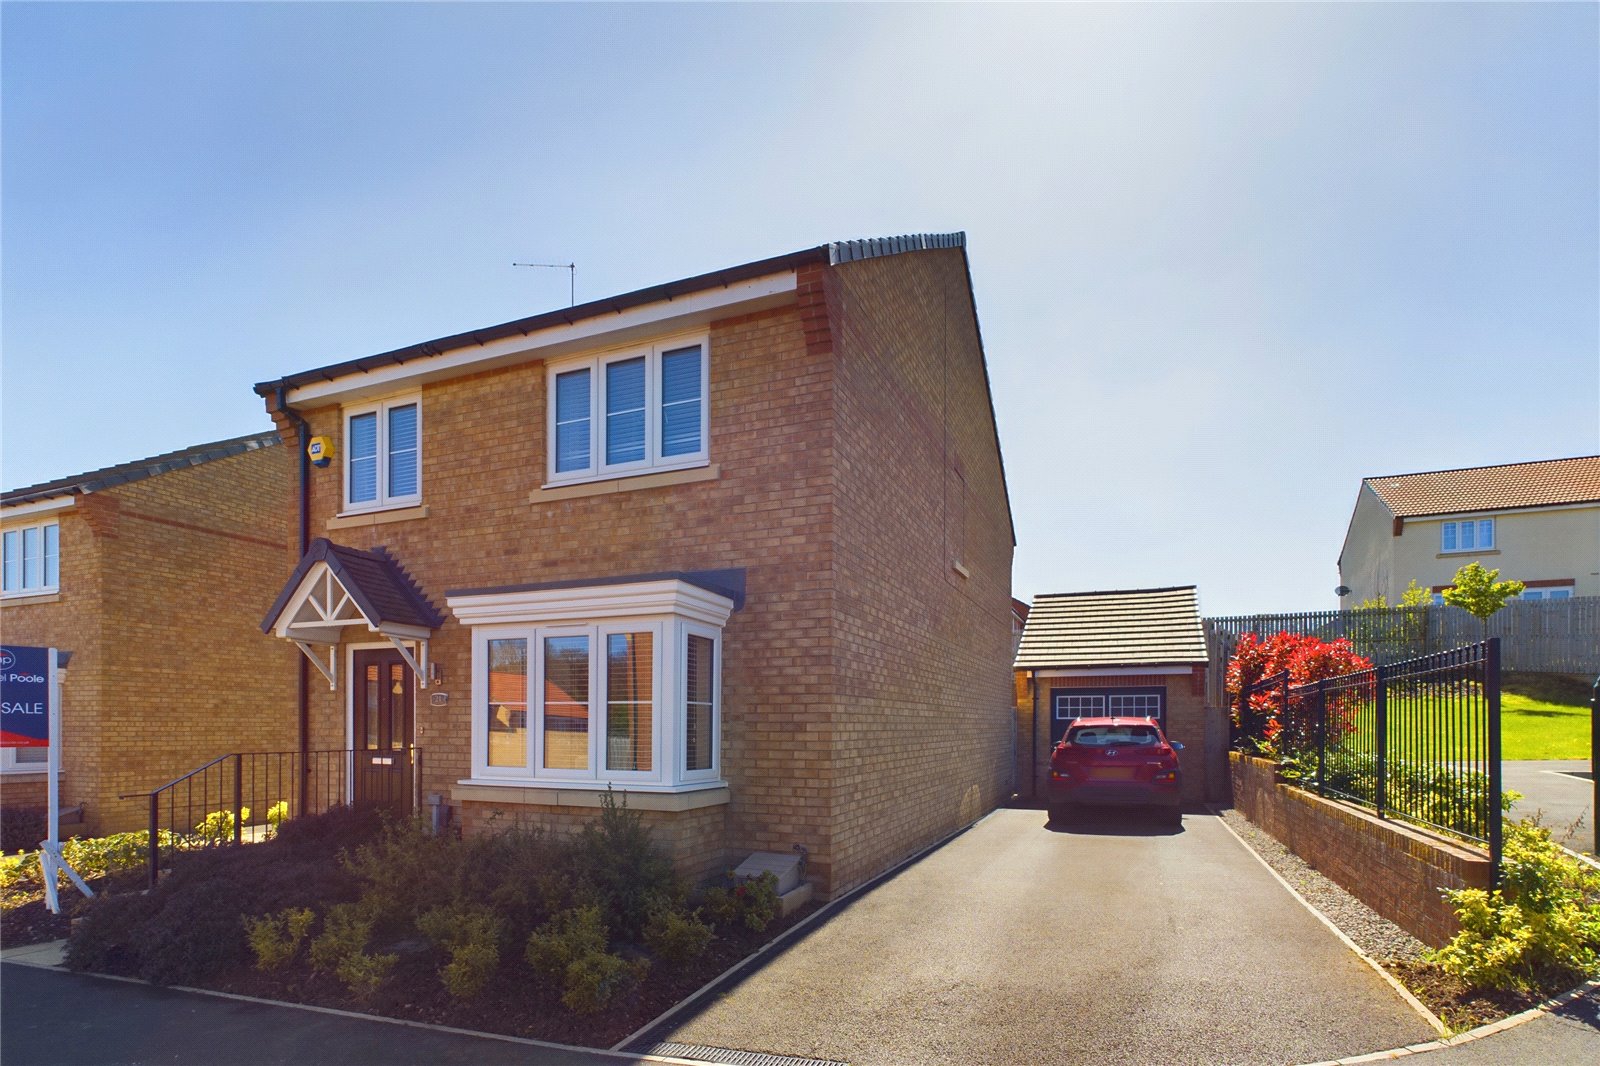 4 bed house for sale in Crossbill Close, Guisborough - Property Image 1